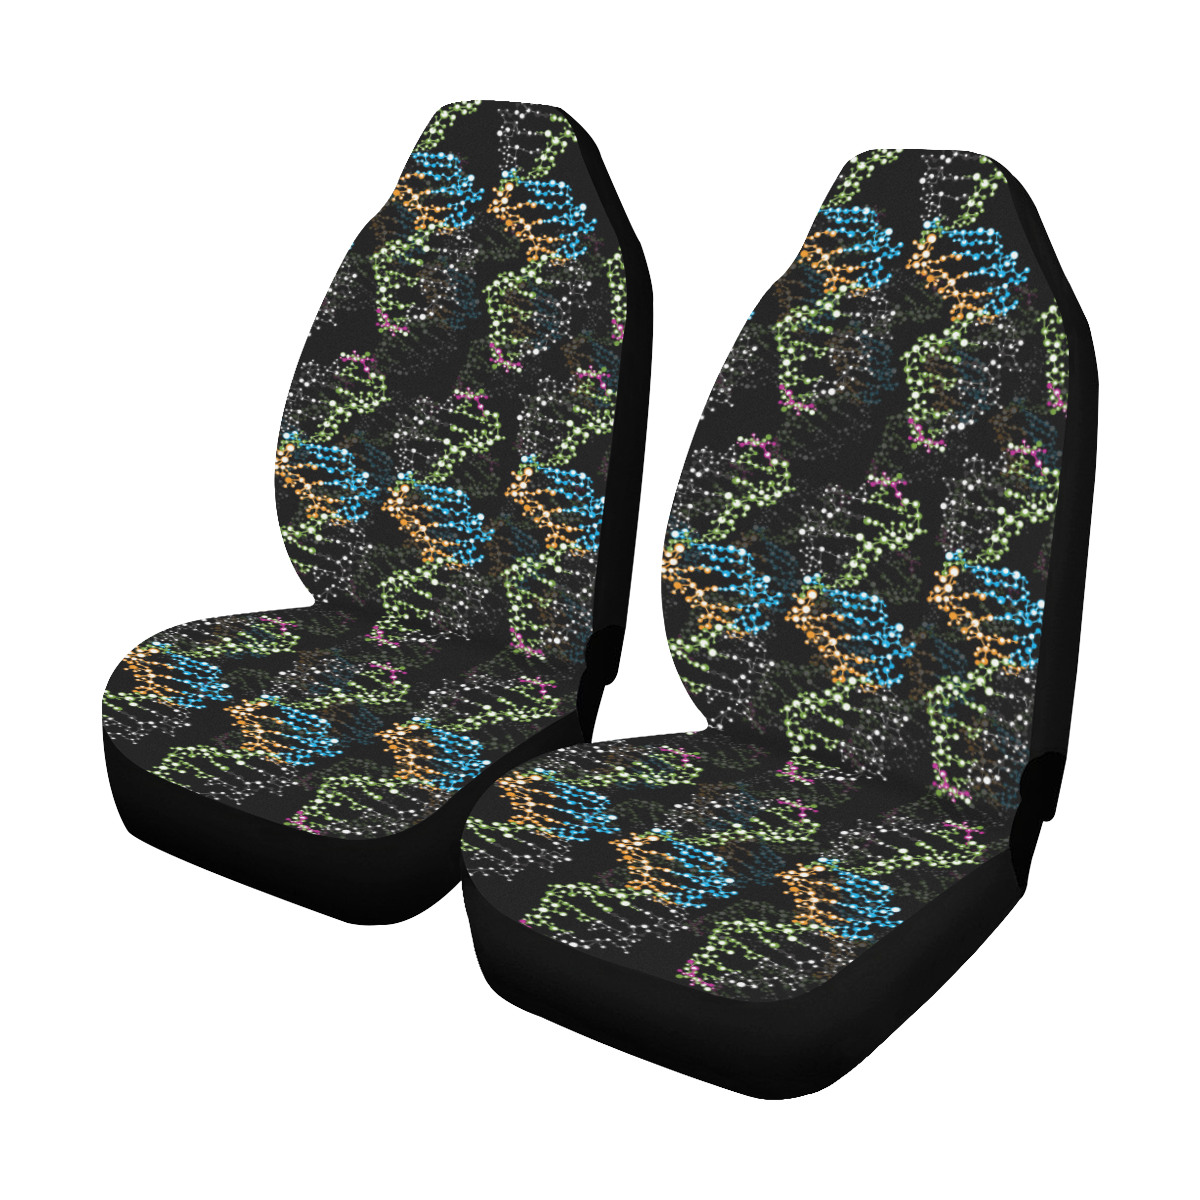 DNA pattern - Biology - Scientist Car Seat Covers (Set of 2)